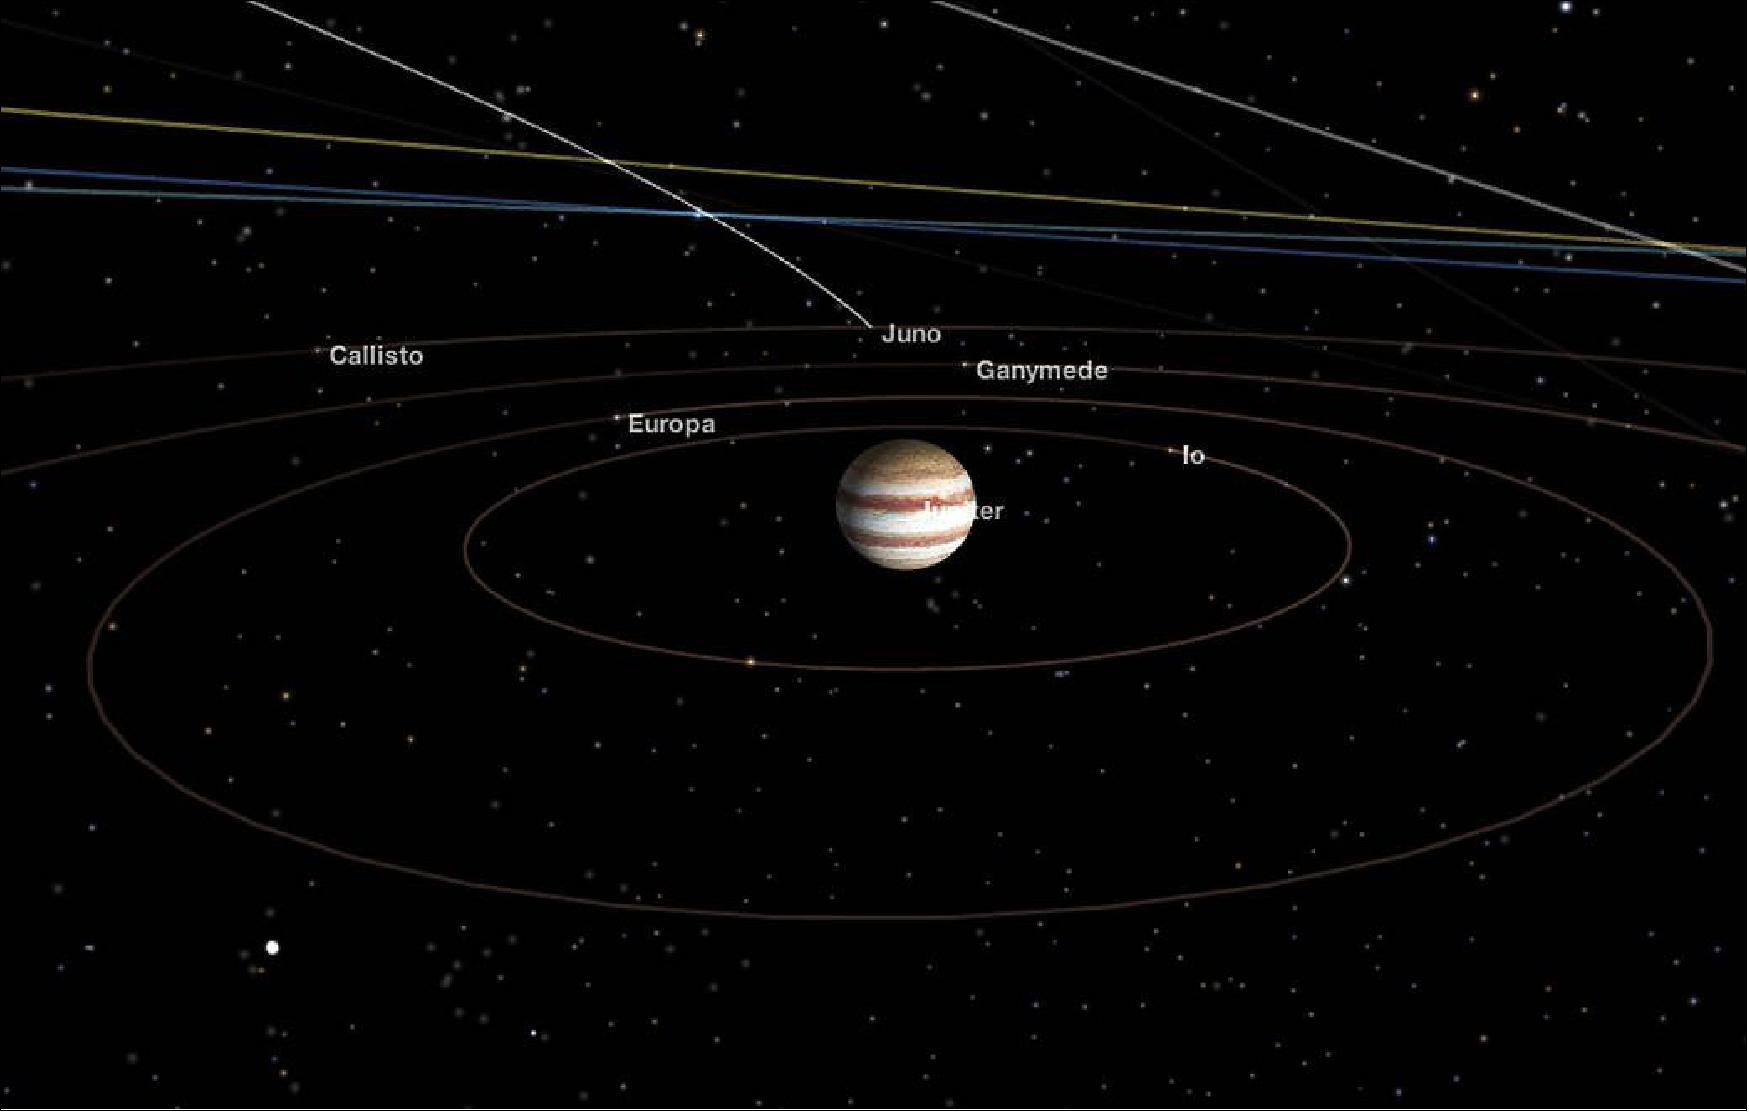 Figure 4: The four largest moons of Jupiter are called the Galilean moons after Italian astronomer Galileo Galilei, who first observed them in 1610 (image credit: NASA)